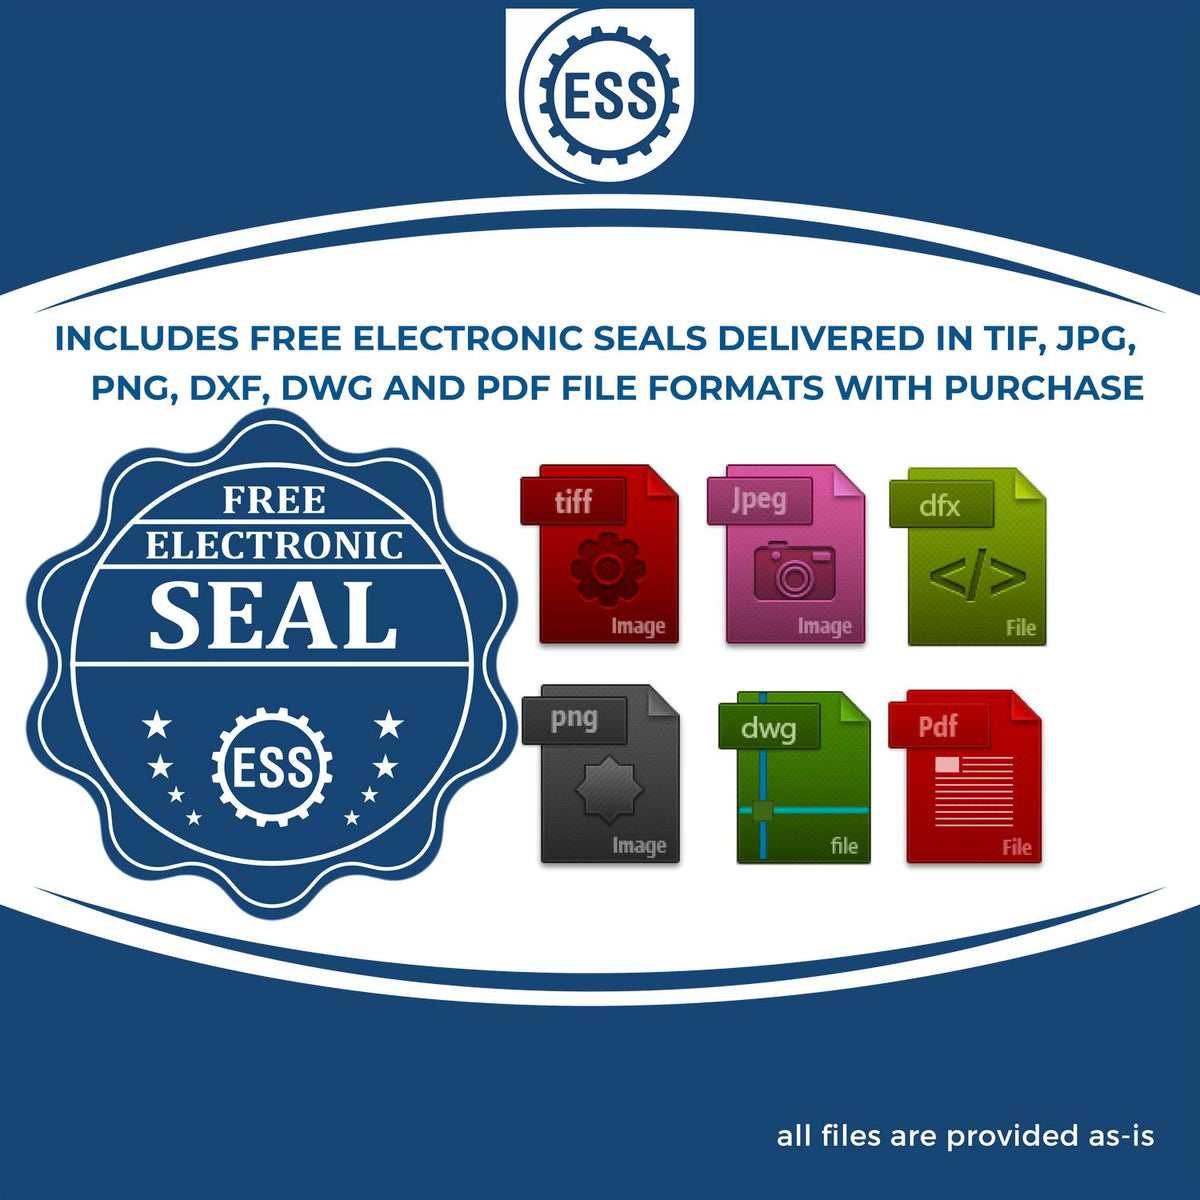 An infographic for the free electronic seal for the Soft New Jersey Professional Engineer Seal illustrating the different file type icons such as DXF, DWG, TIF, JPG and PNG.